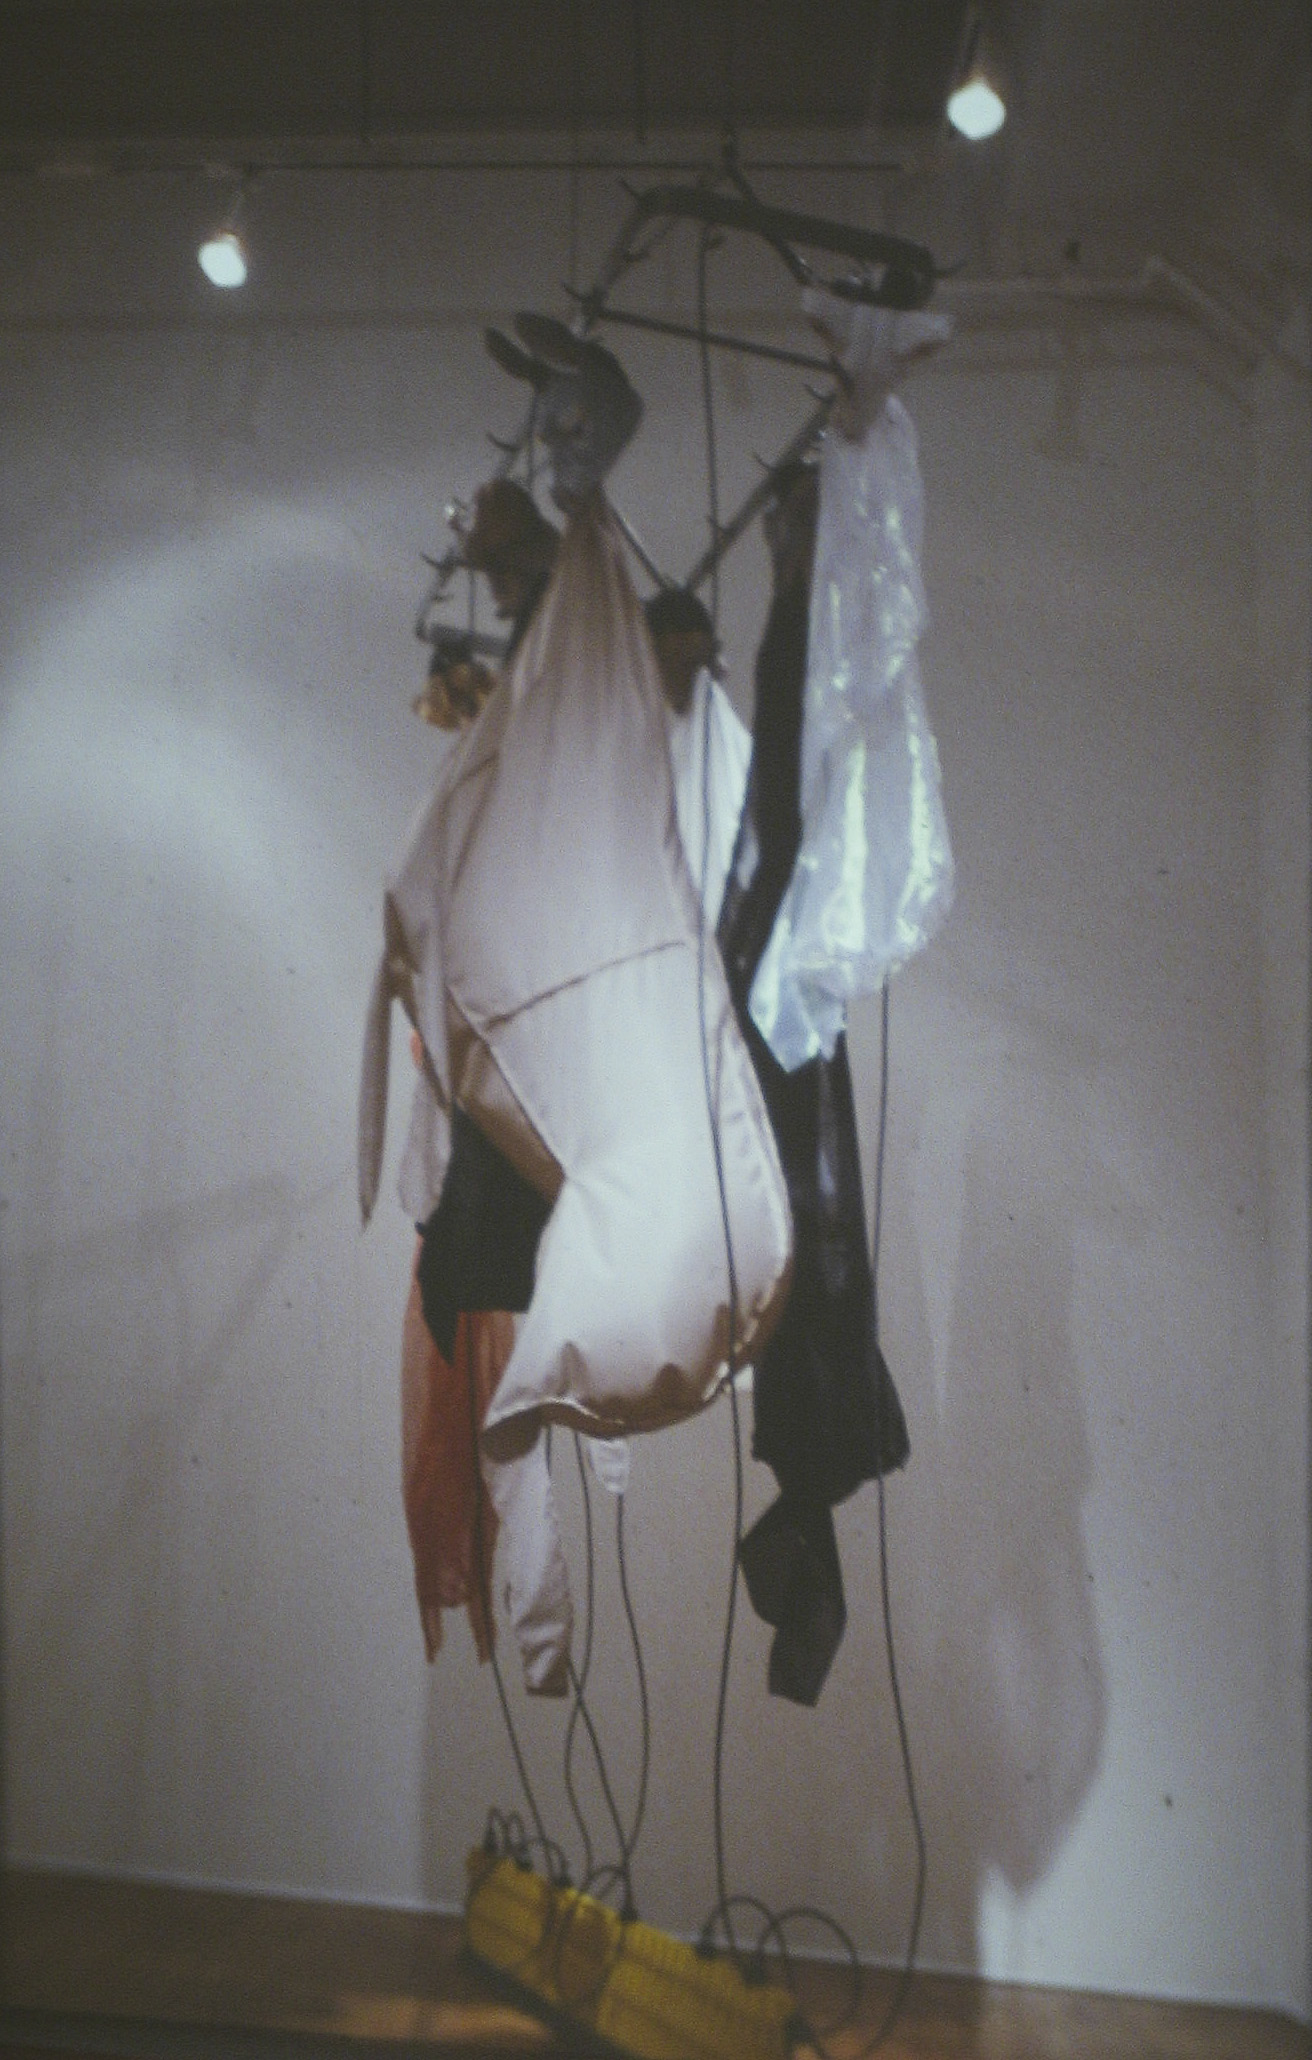 Dennis Oppenheim Armatures for Projection: The Early Factory Projects. Curated by Raul Zamudio. White Box, 2004 (32)